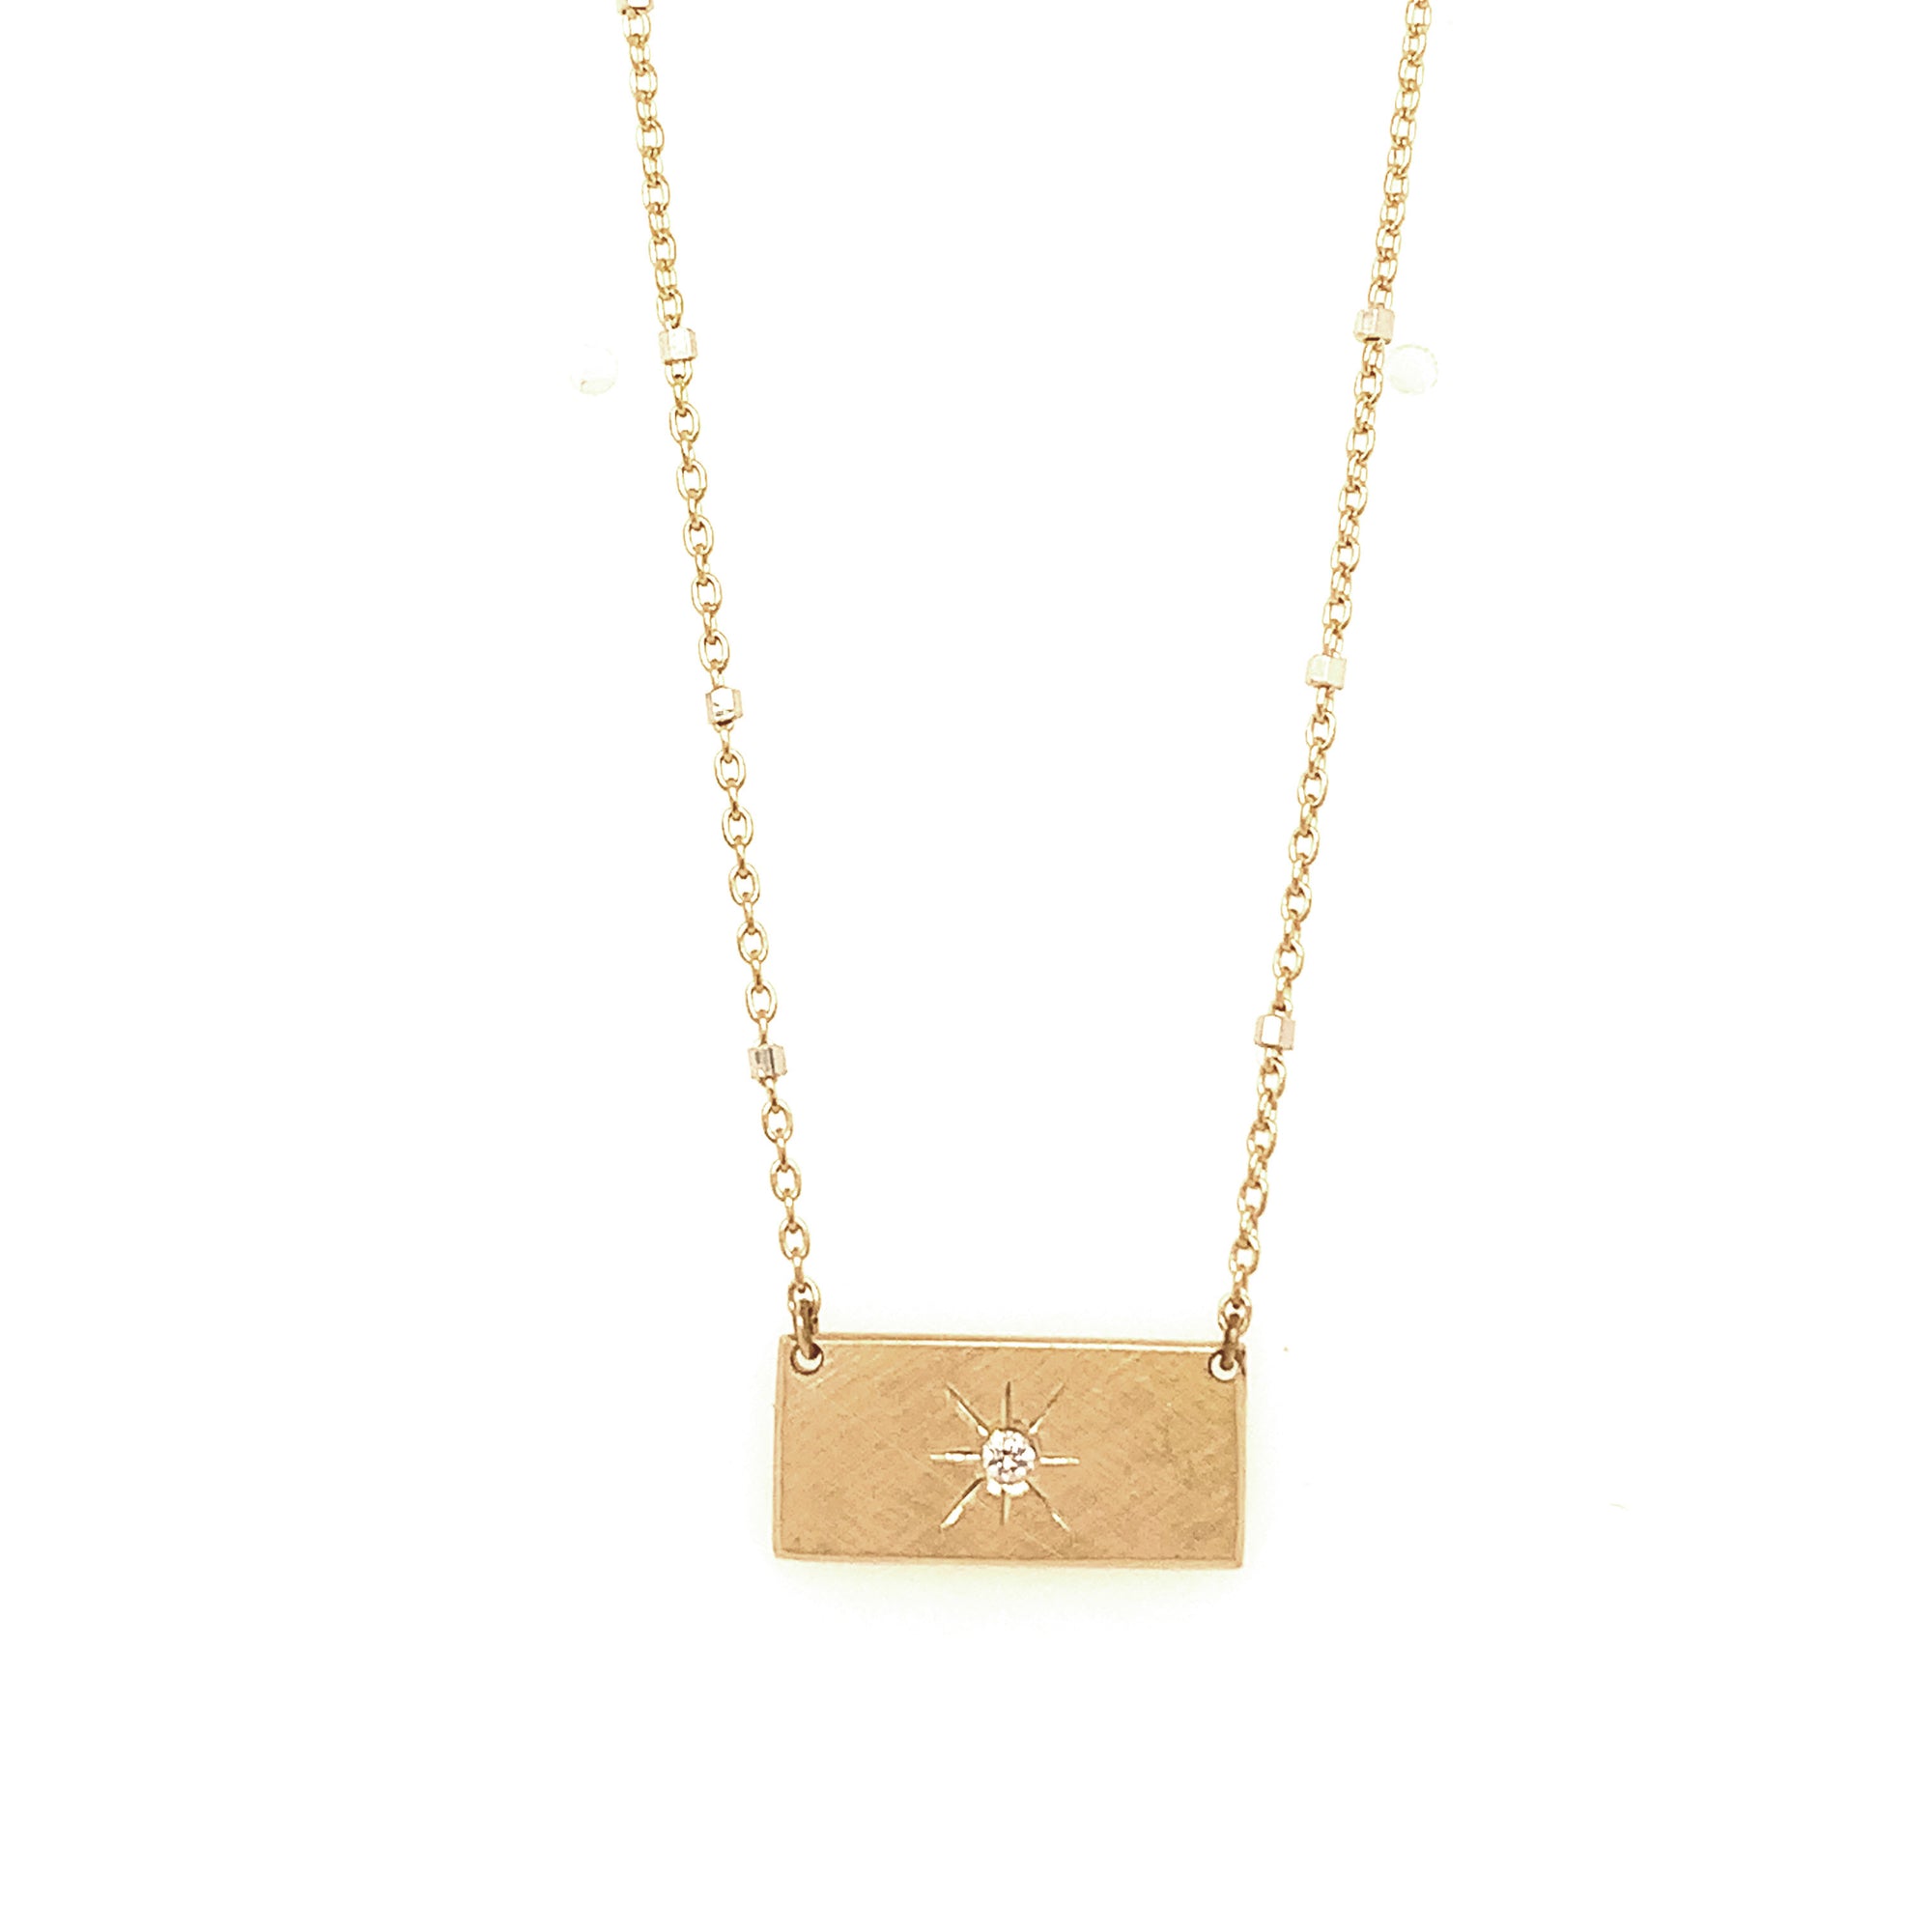 14k yellow gold COCA bar necklace with diamond